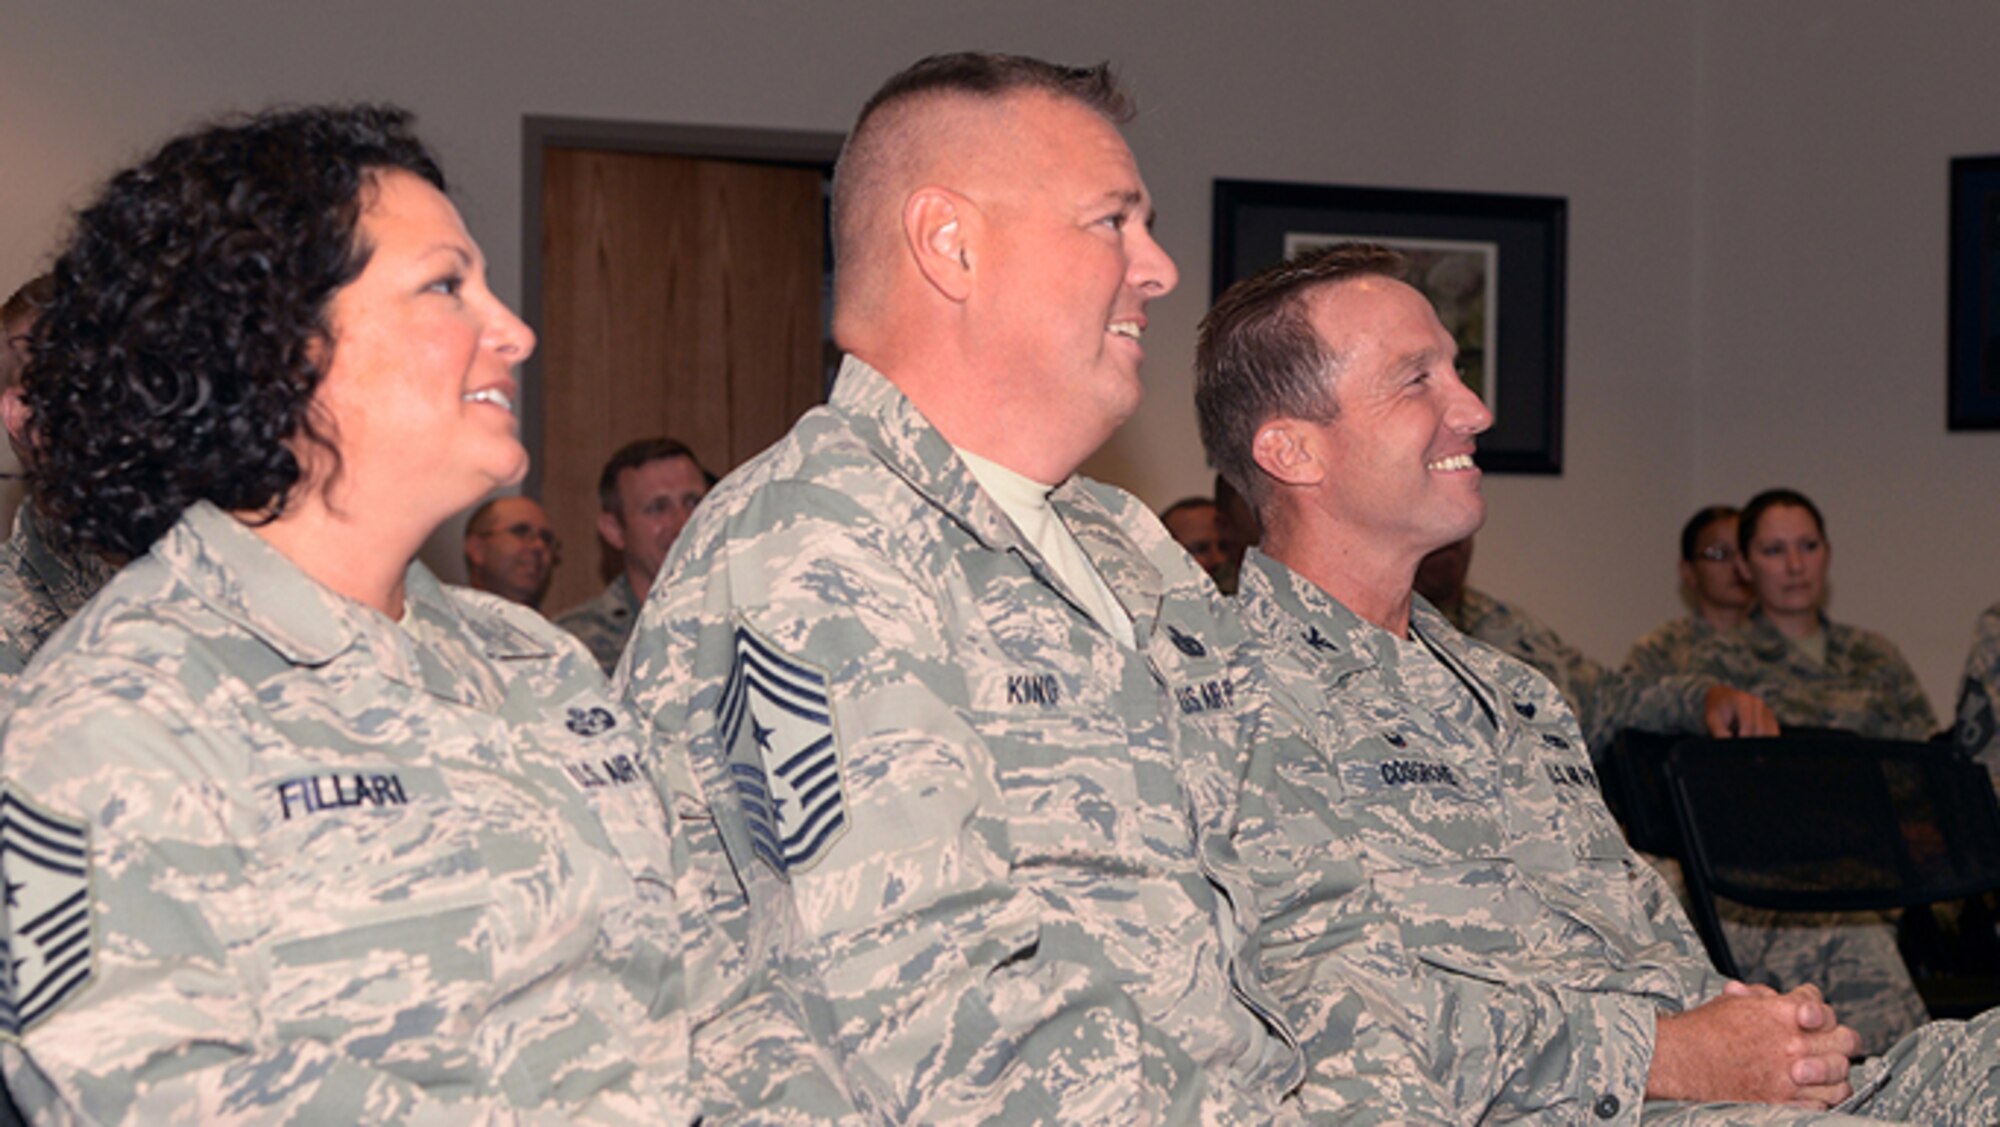 A picture of New Jersey Air National Guard Command Chief Master Sgt. Janeen Fillari, 1st Air Force Command Chief Master Sgt. Richard King and Col. John Cosgrove, maintenance group commander of the 177th Fighter Wing, attending an awards ceremony.